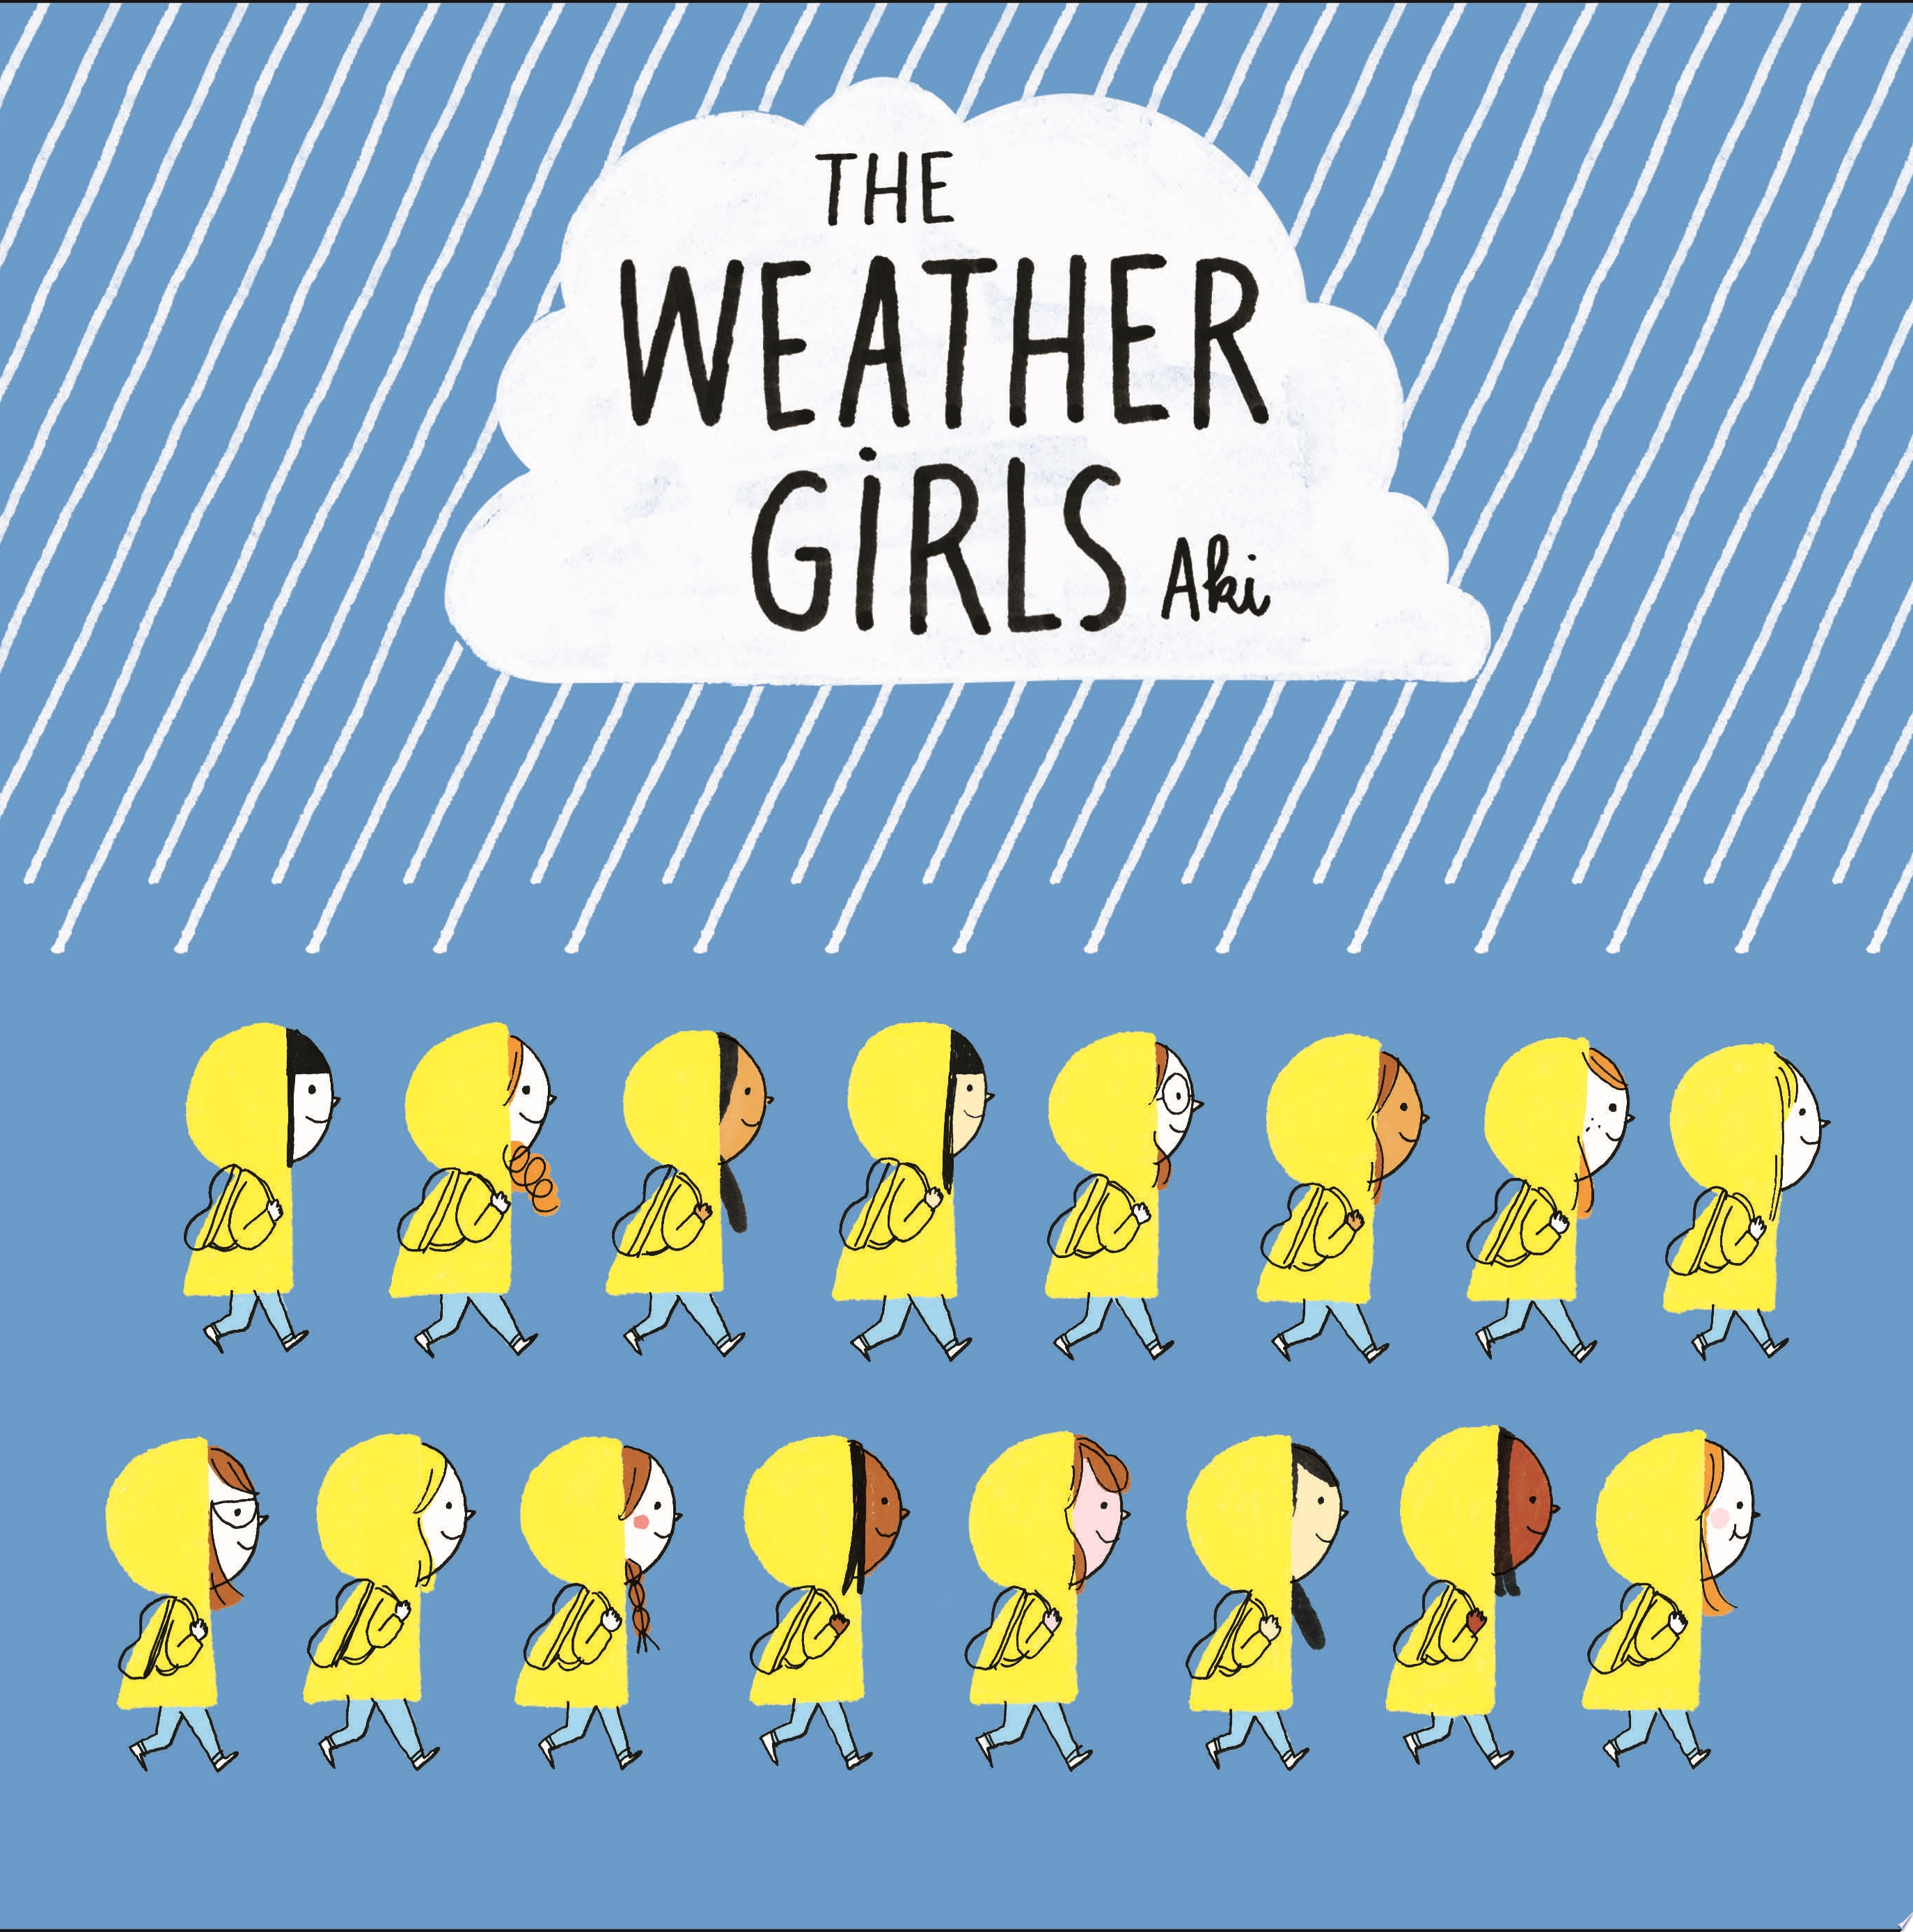 Image for "The Weather Girls"